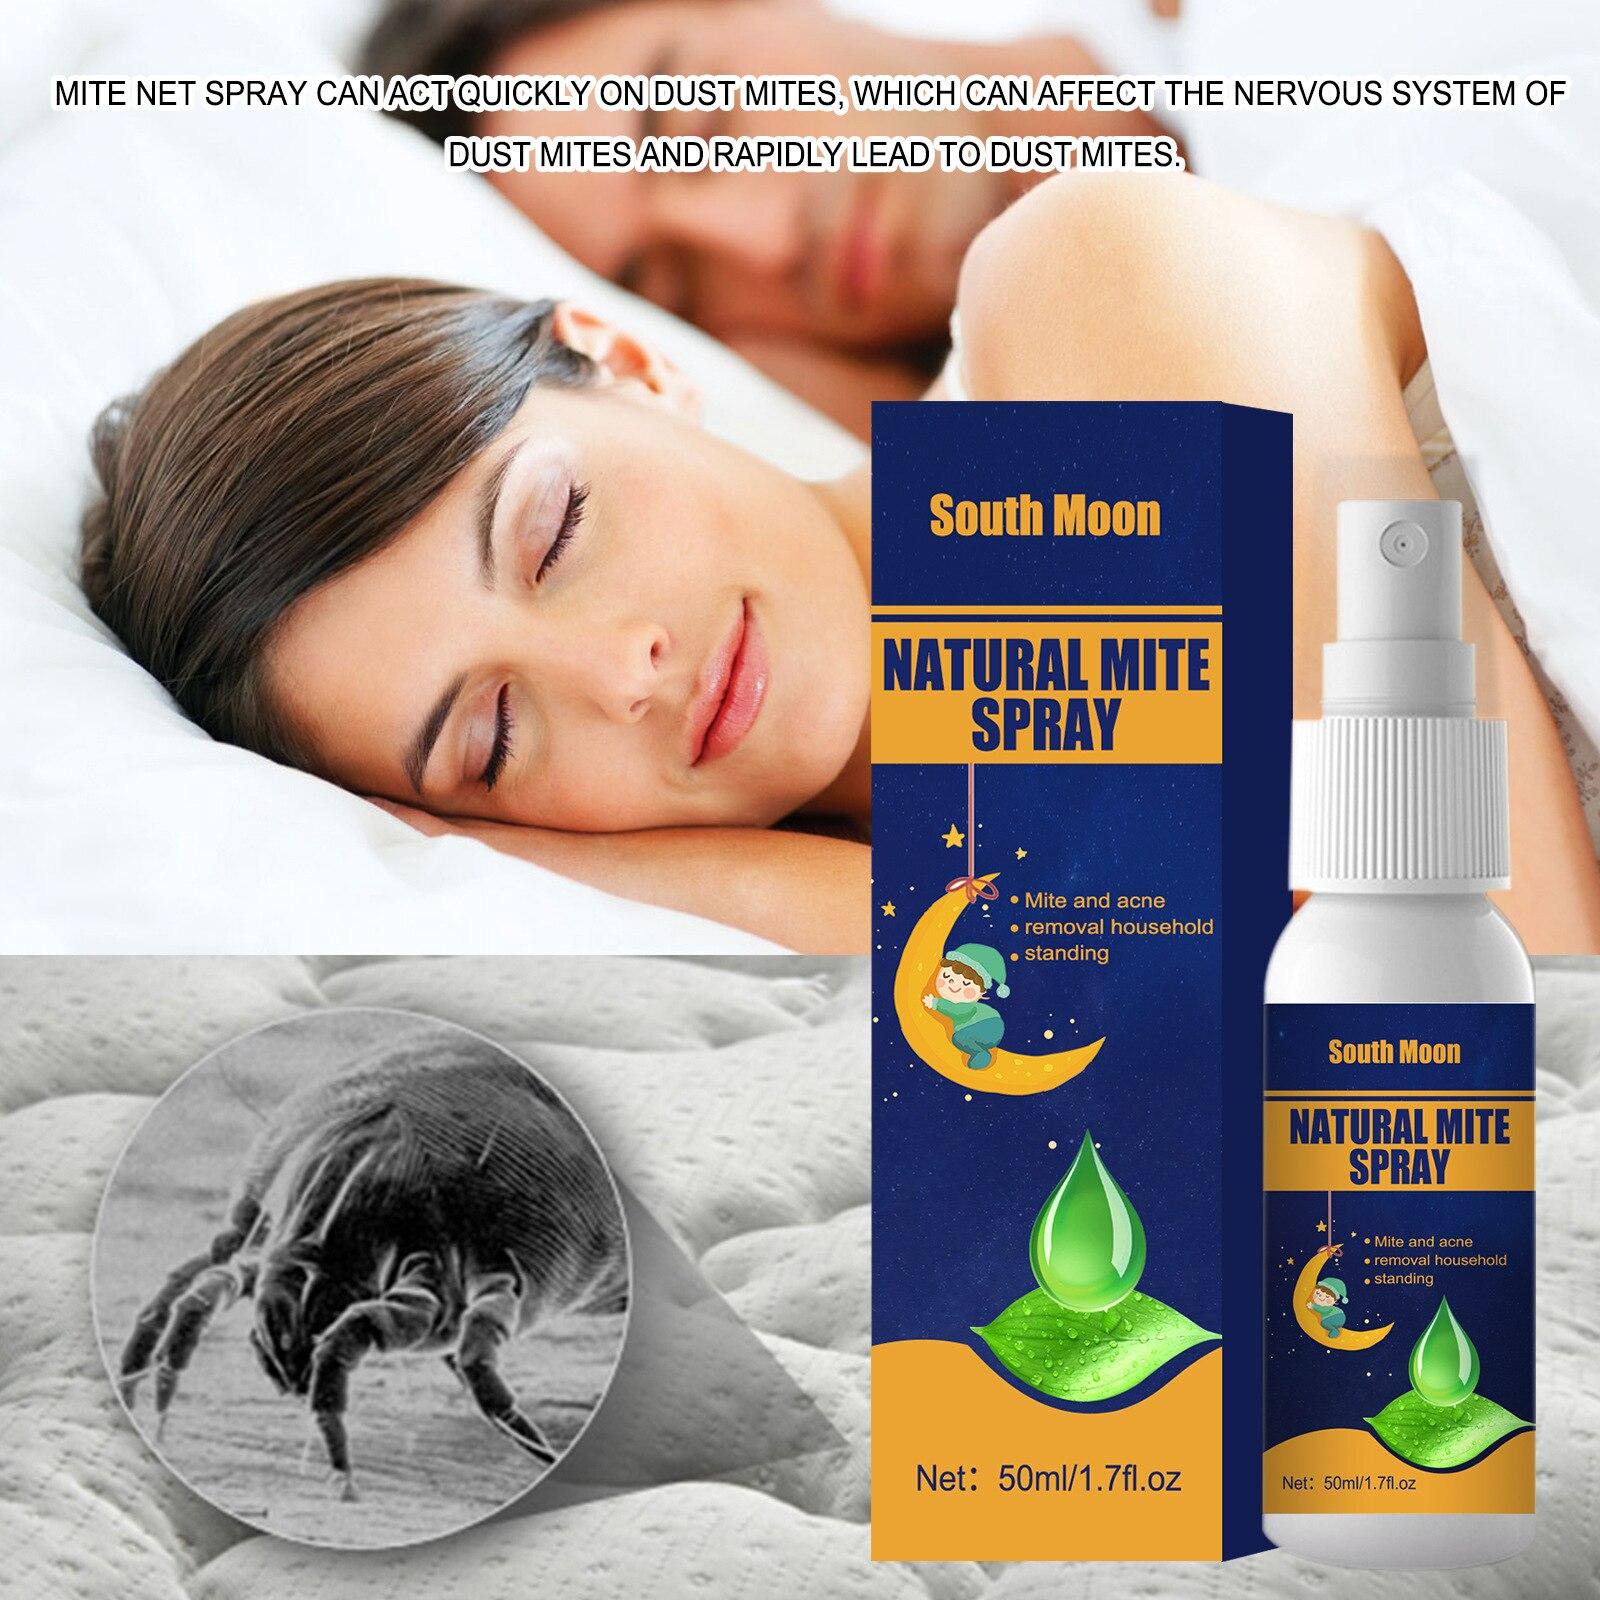 Dust Mite Spray Removal Gently Anti Mites Killer Home Indoor Environment Bed Clothes Pillow Bedding Meets Human Safe 50ml